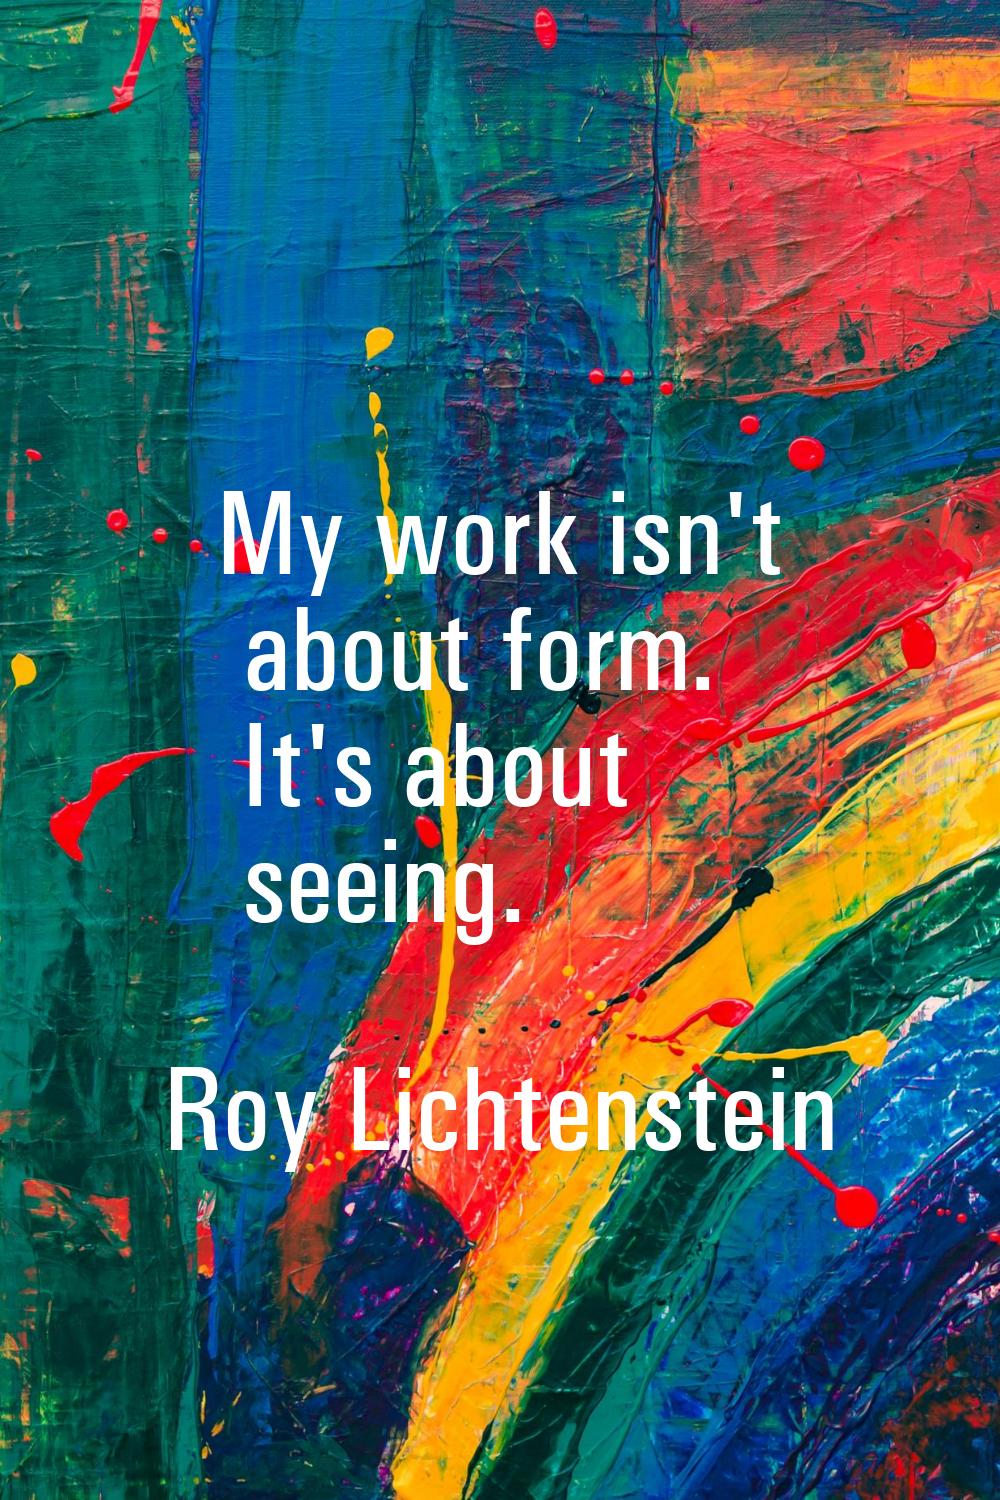 My work isn't about form. It's about seeing.